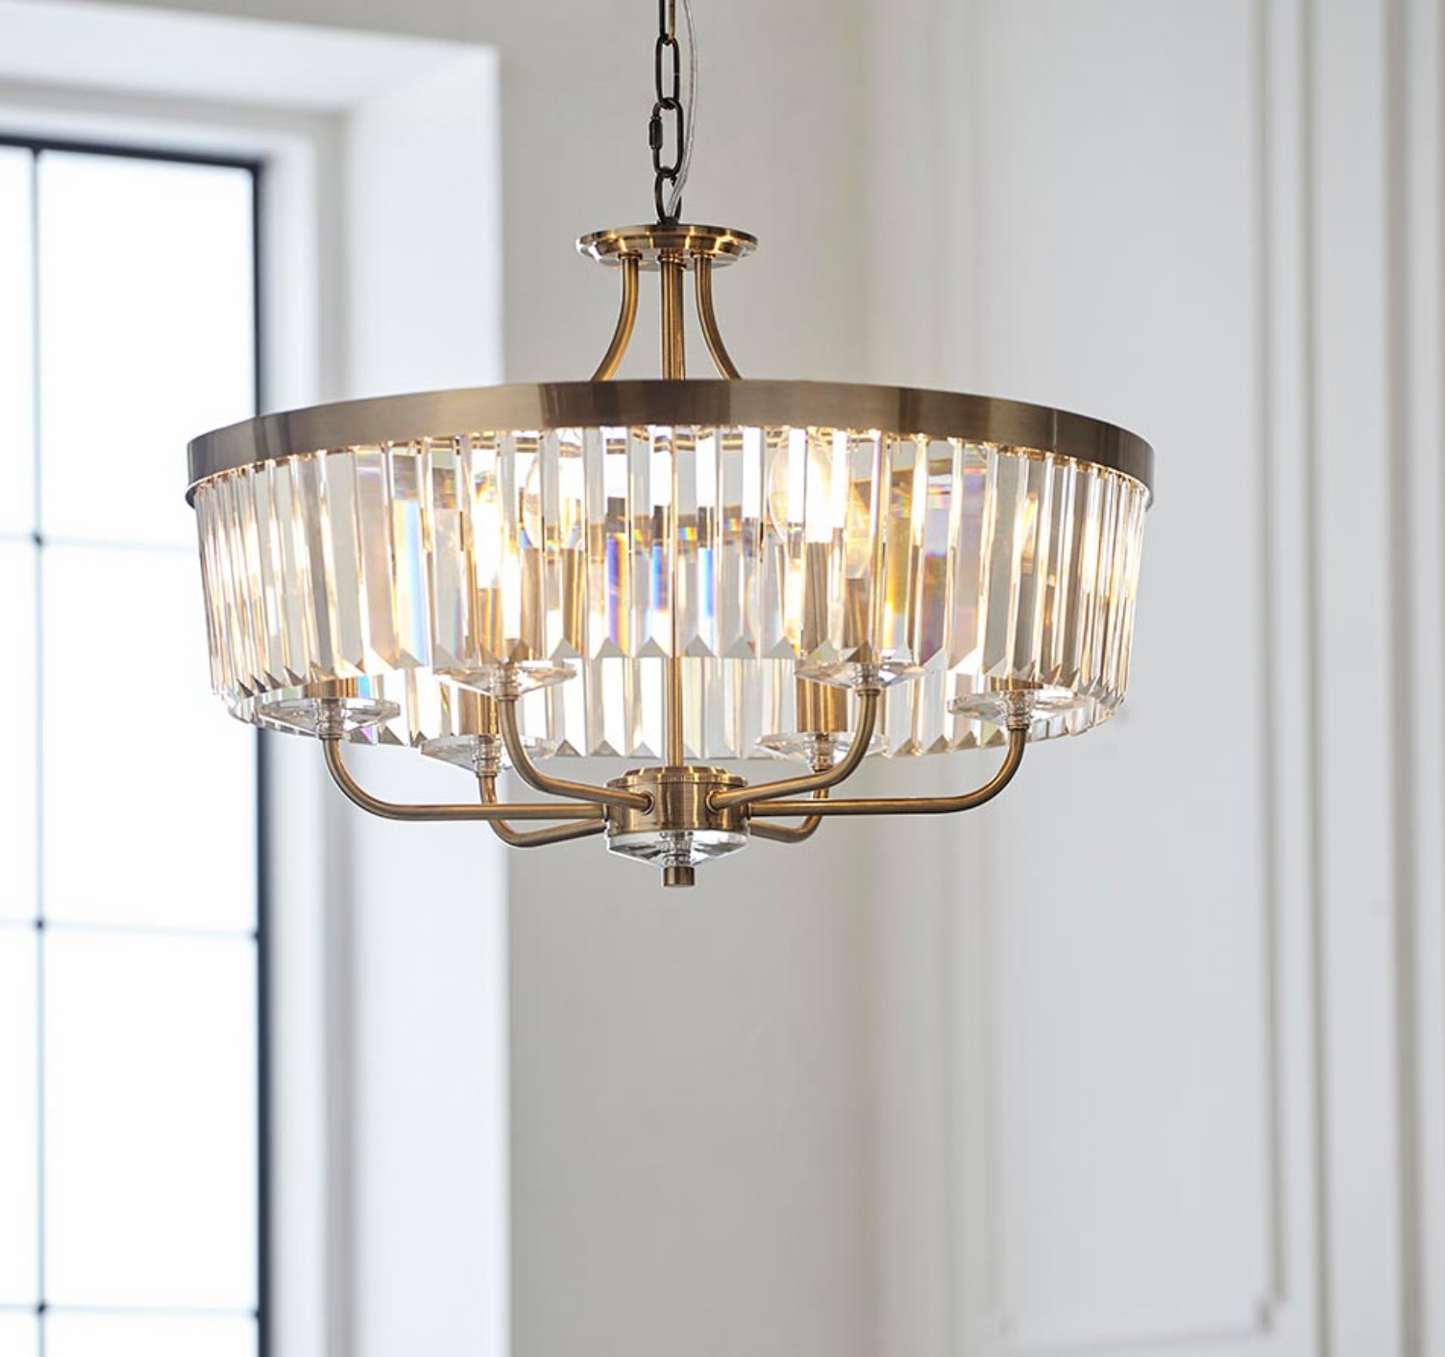 Round Antique Chandelier, Brass And Clear Cut Glass - ID 12518